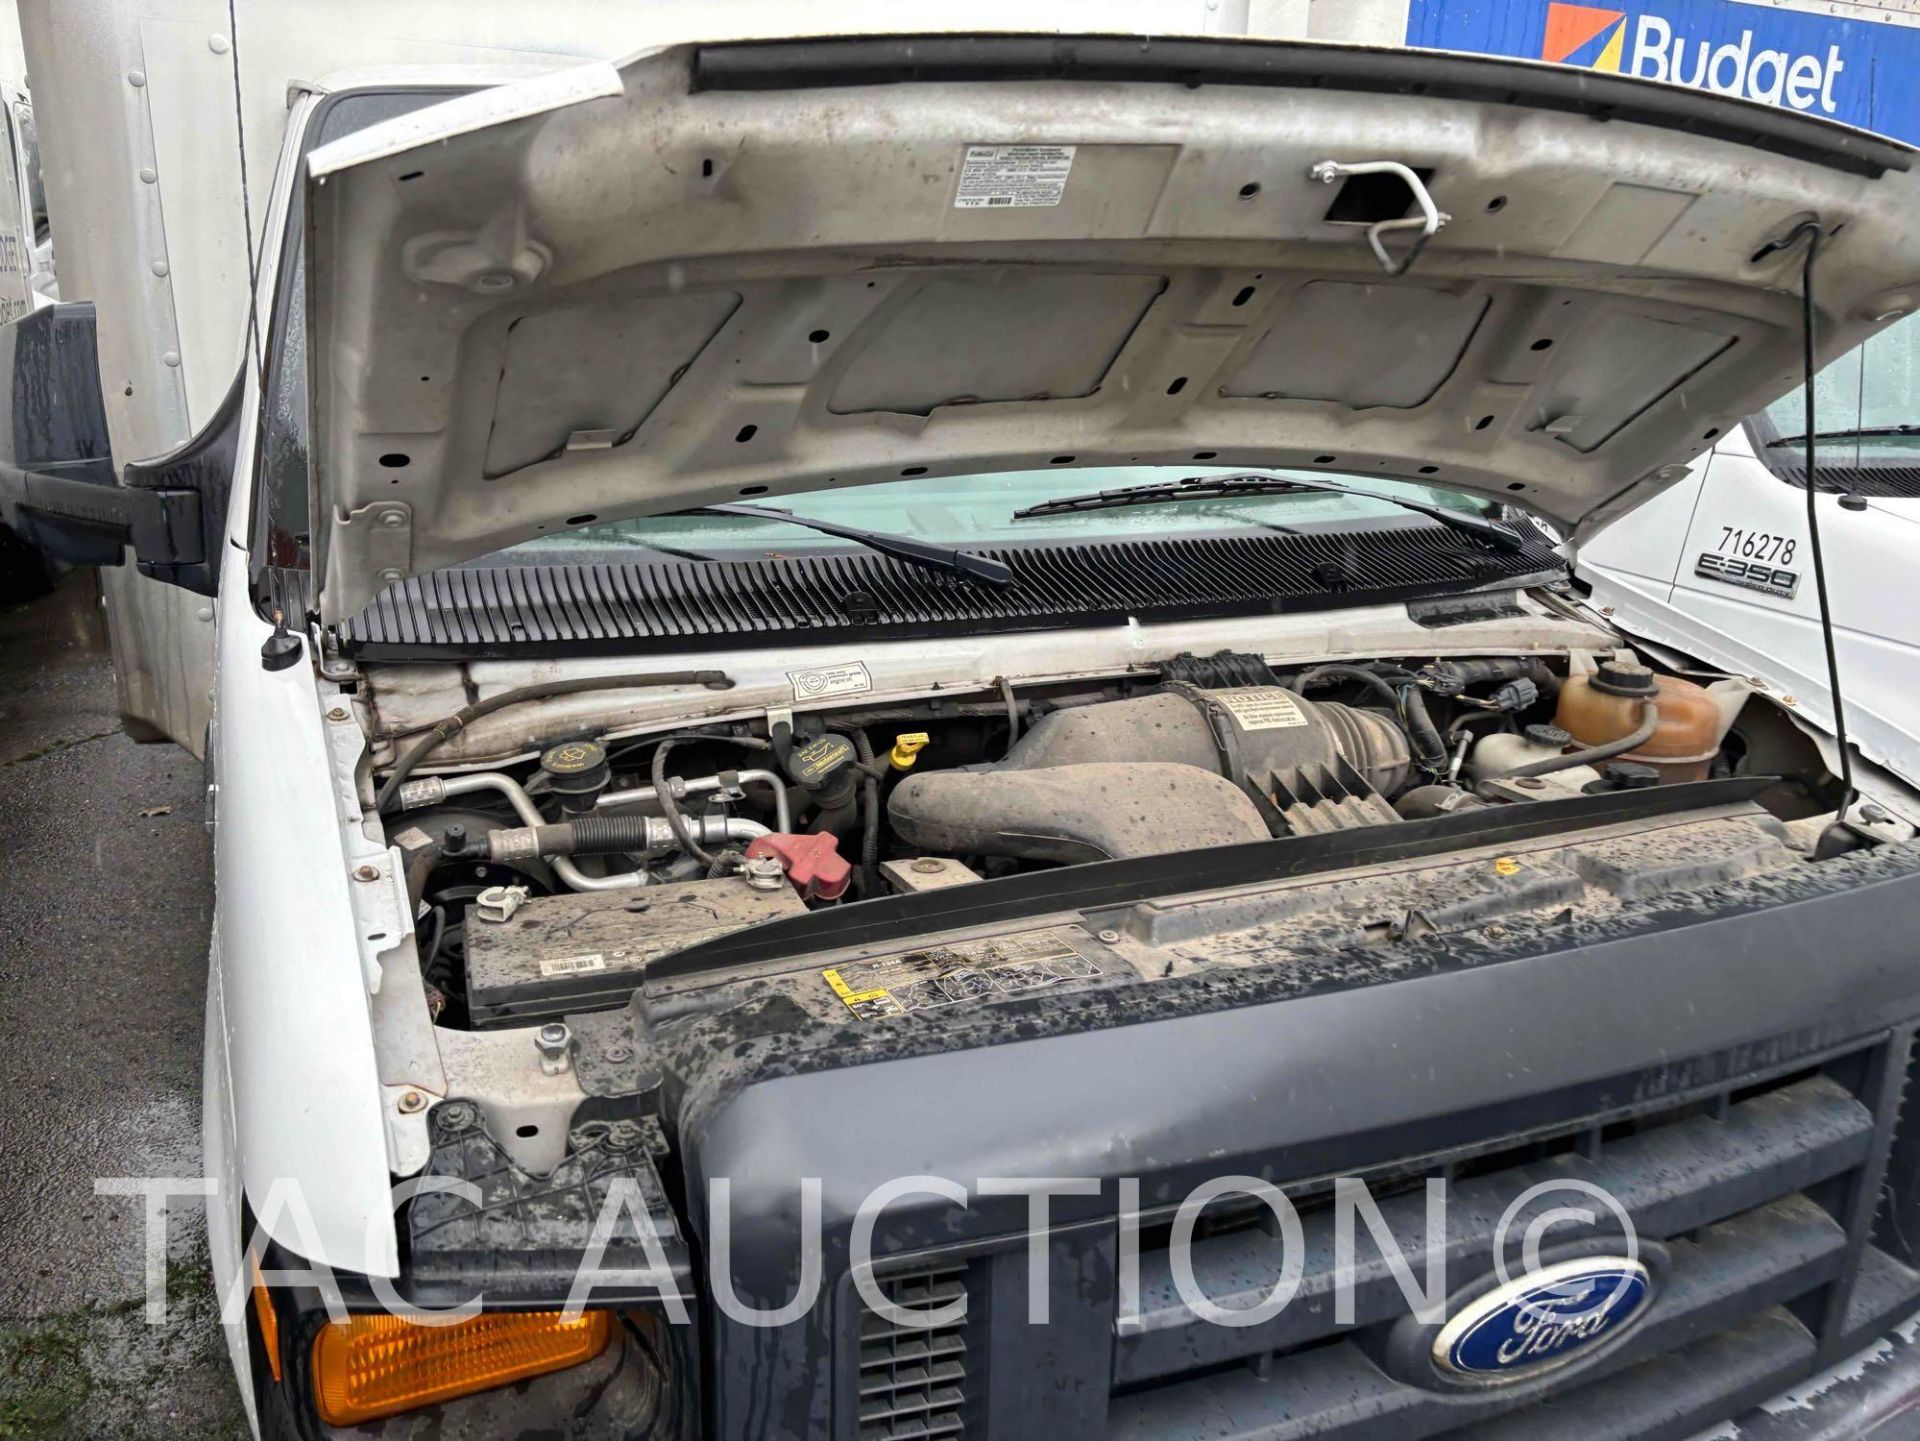 2014 Ford E-350 16ft Box Truck - Image 78 of 82